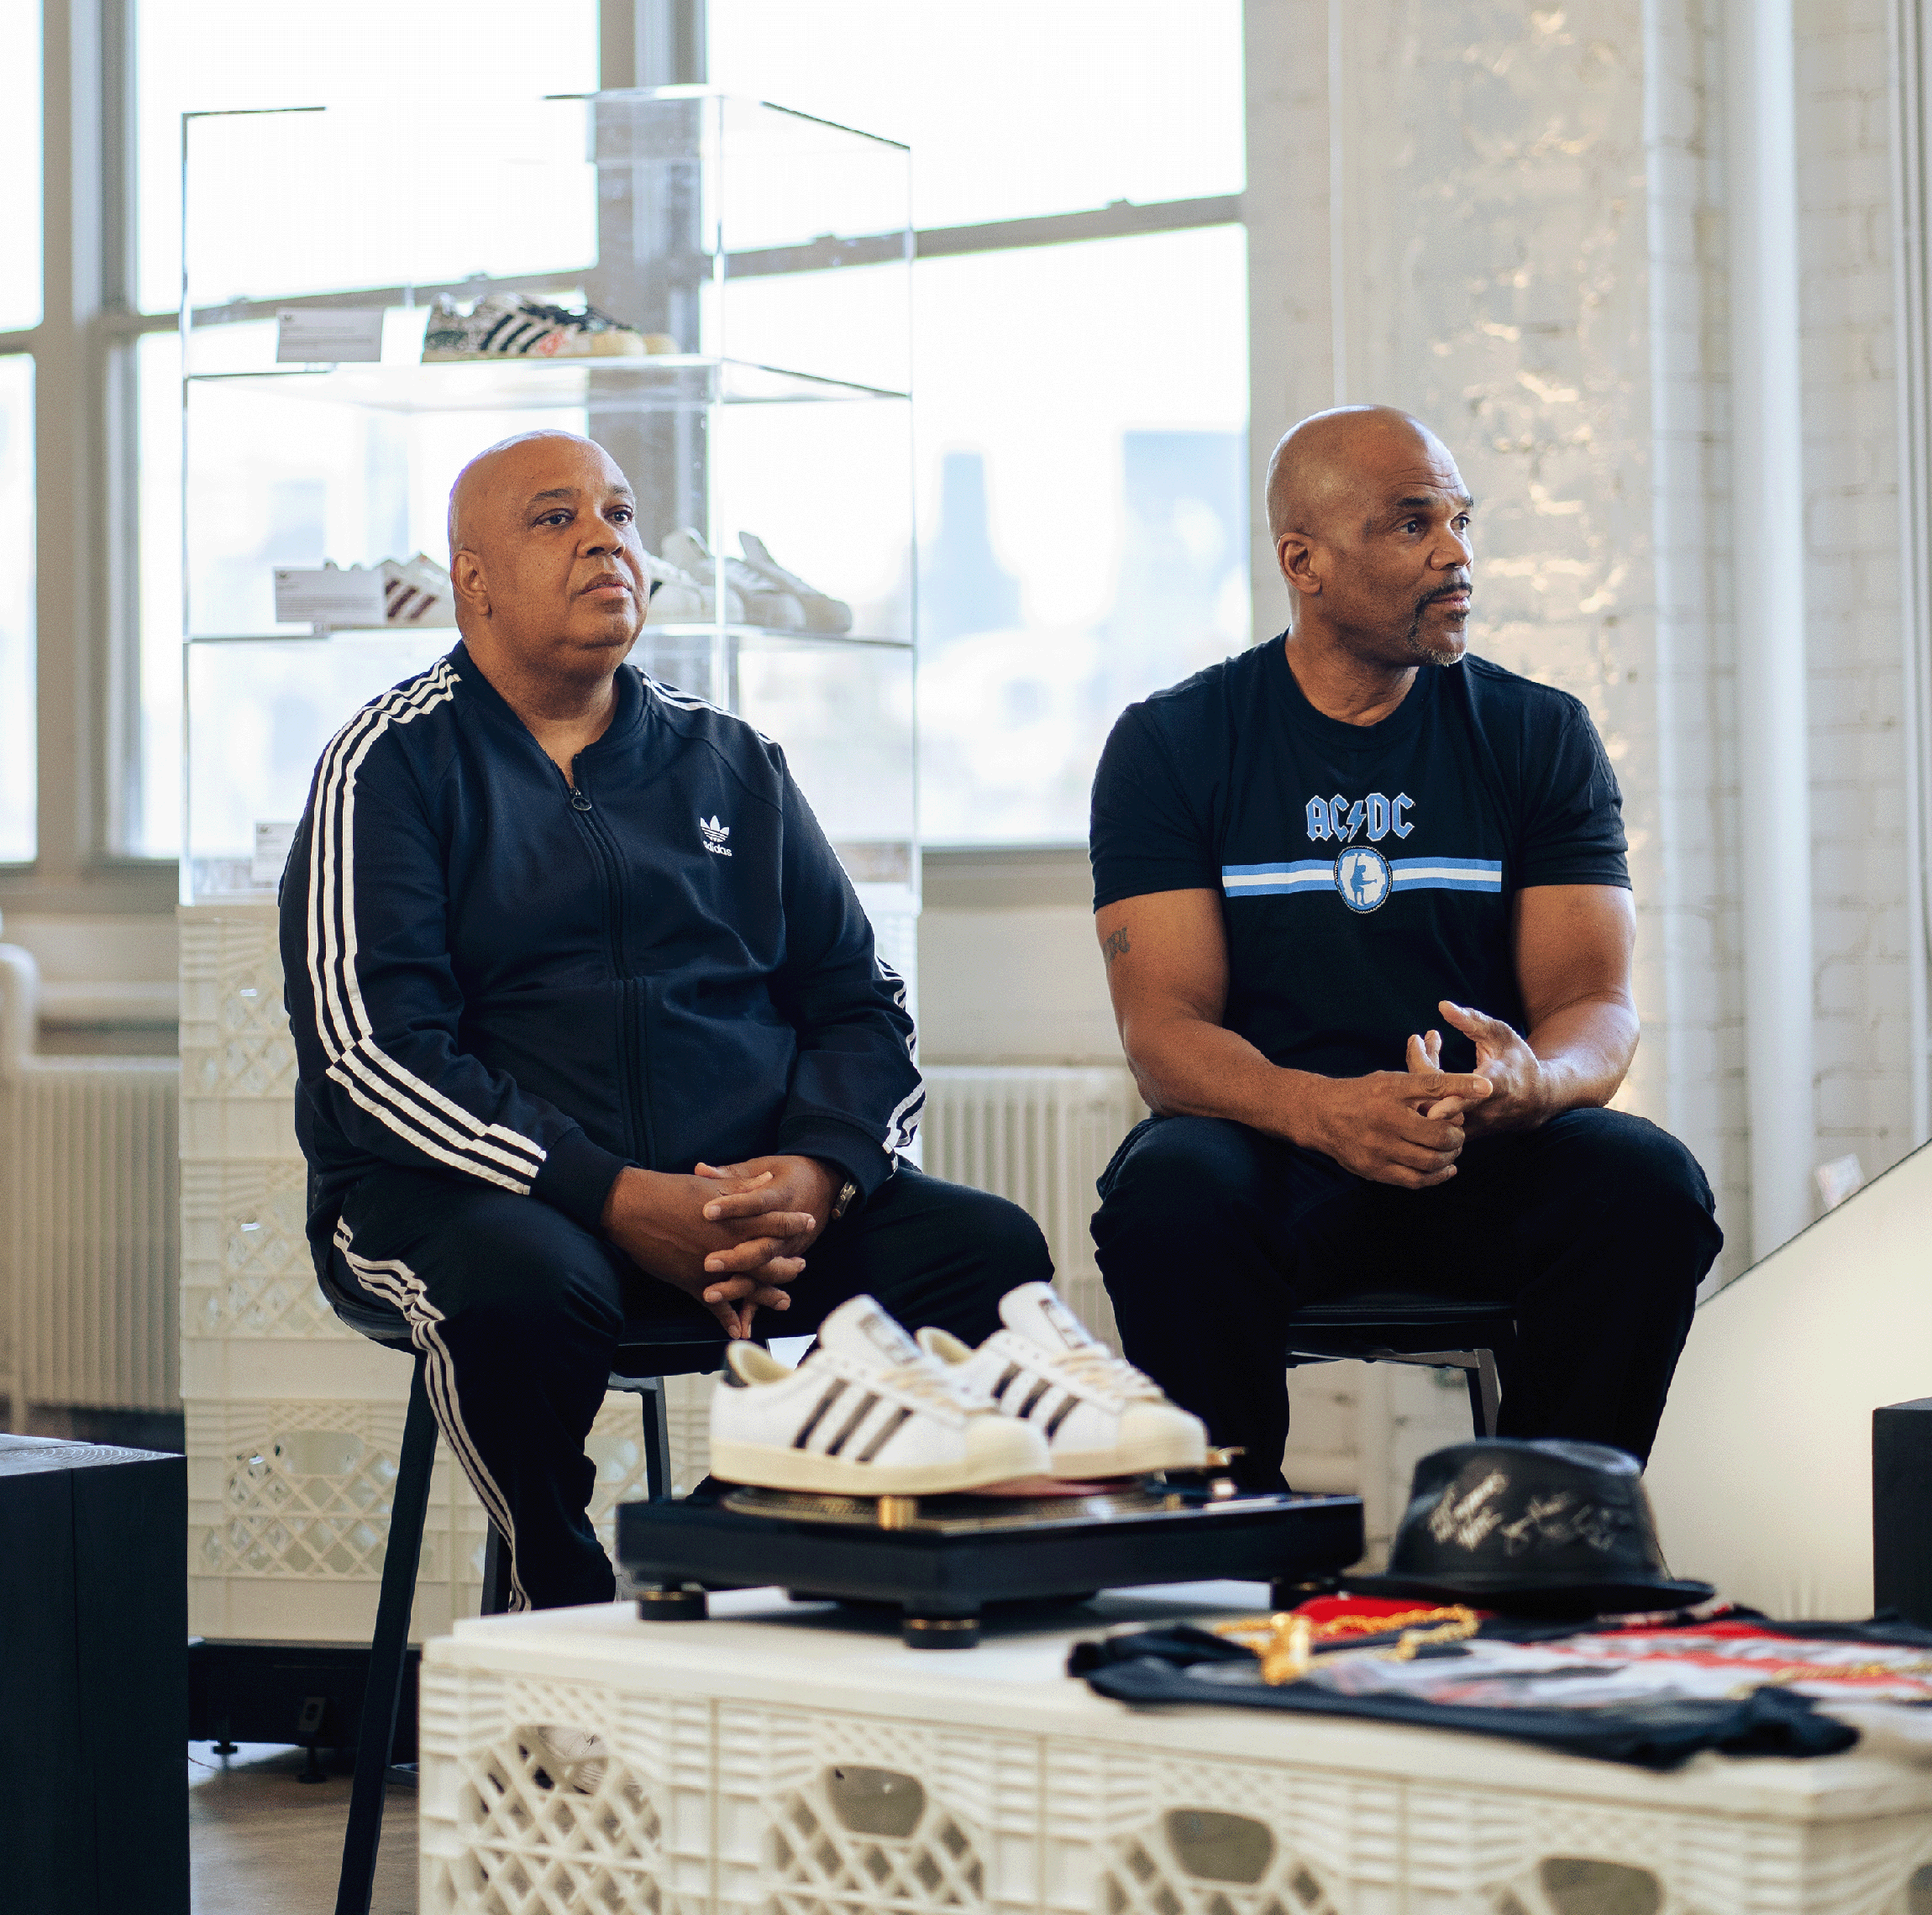 Run and DMC at the Adidas office in New York City